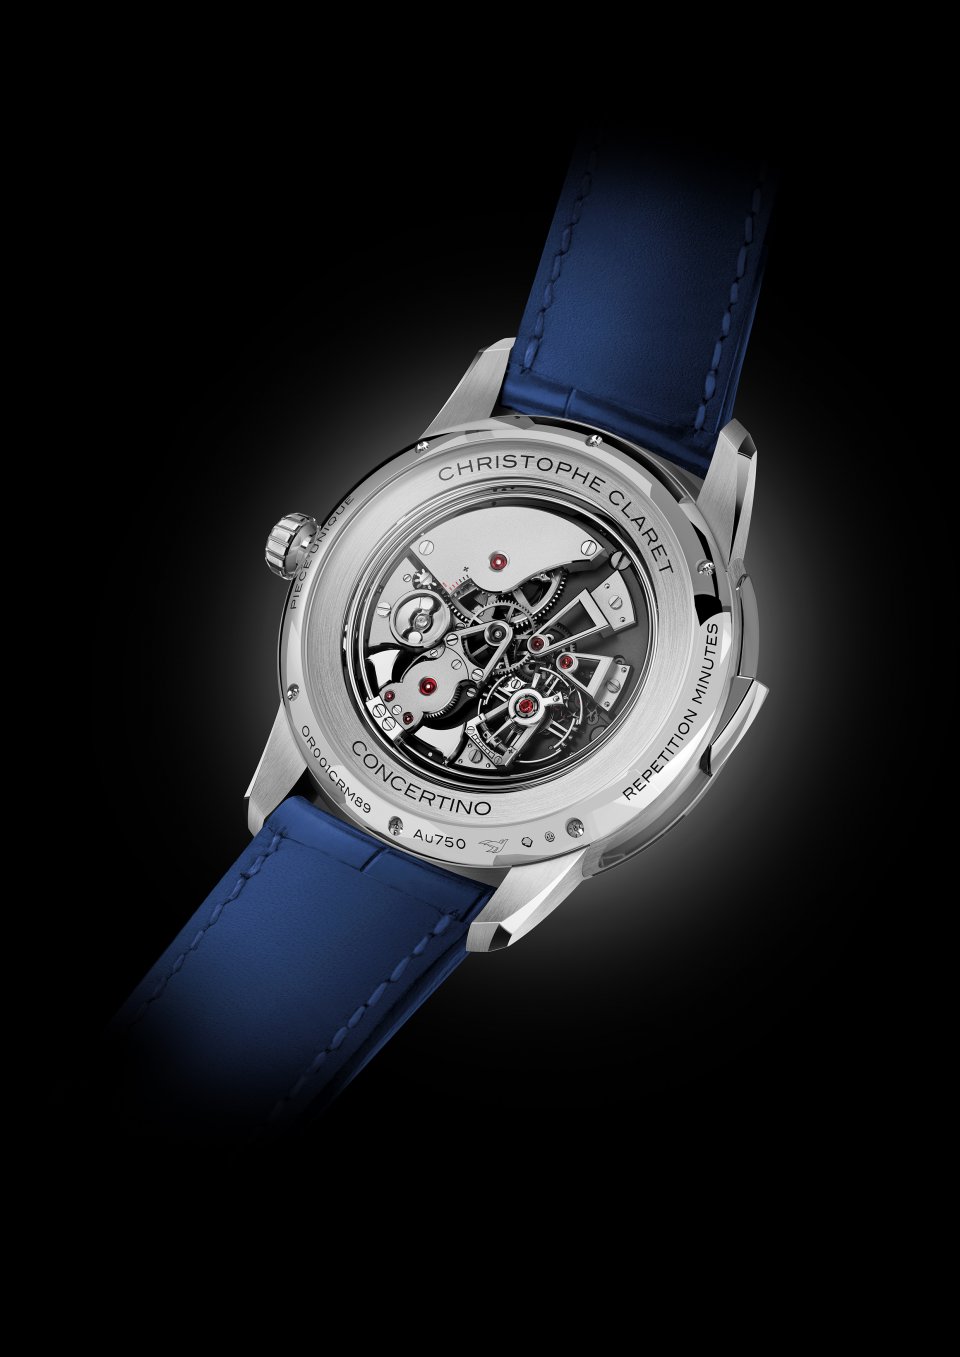 Concertino Dragon, a new striking timepiece from Christophe Claret